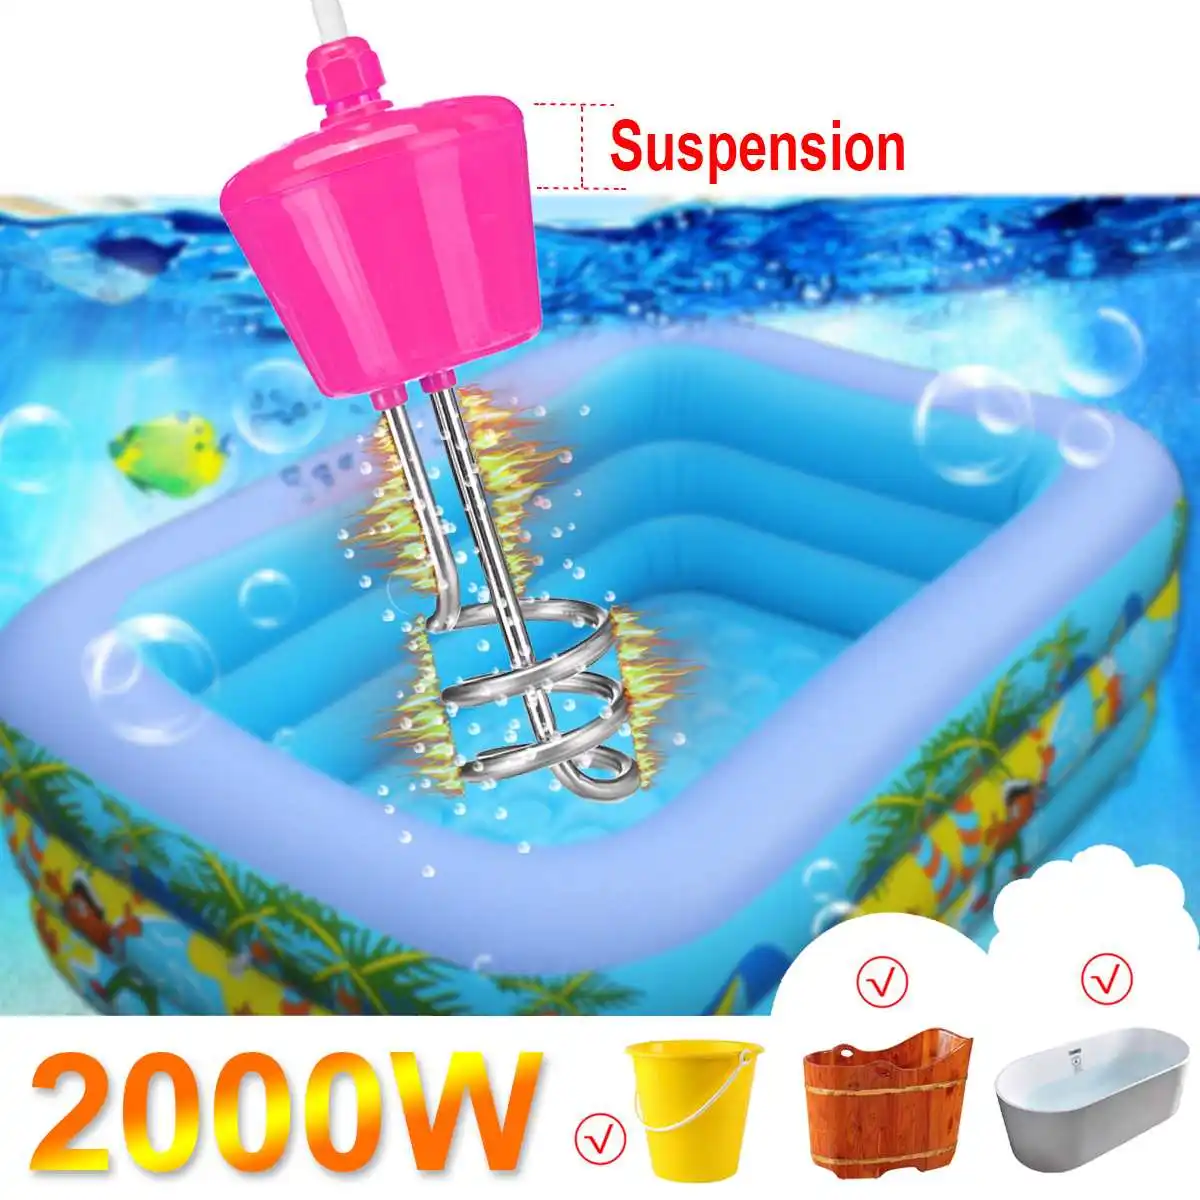 

2000W 2M Portable Suspension Electric Immersion Water Heater Element Boiler for Inflatable Pool Tub Travel Camping Picnic Travel